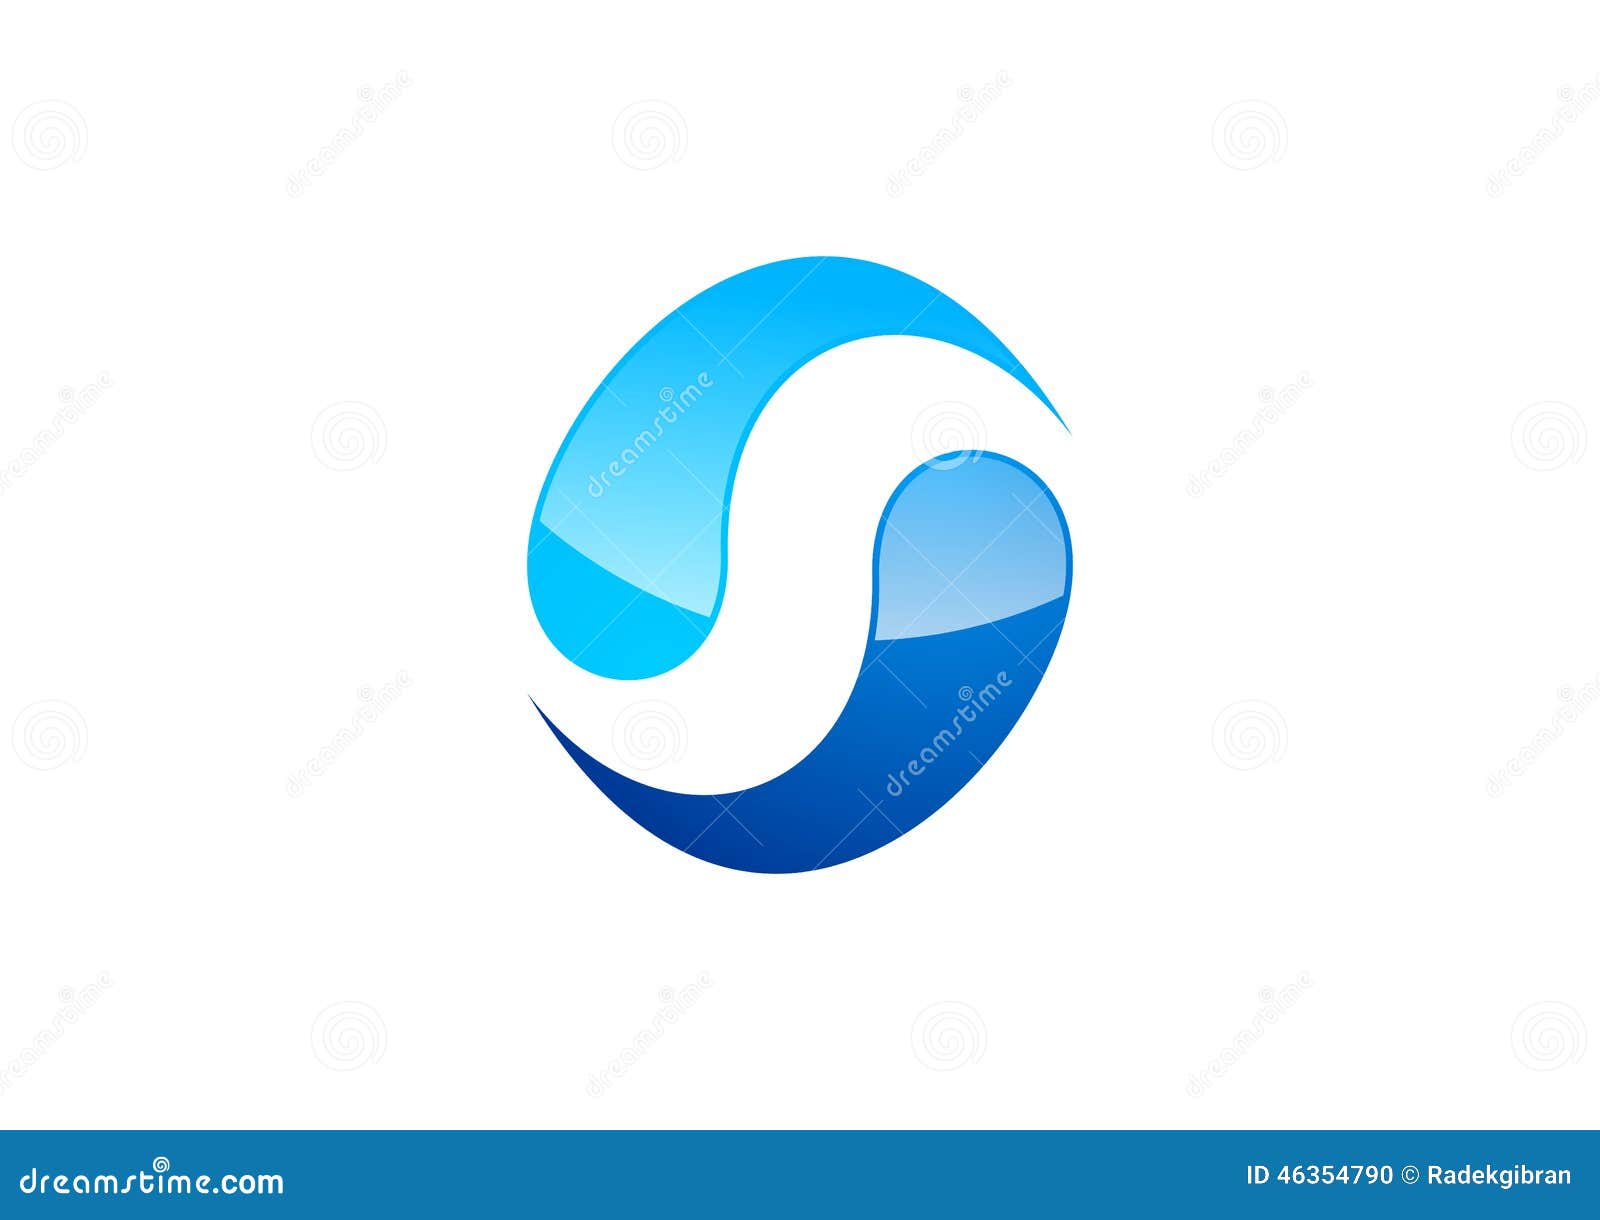 circle, water, logo, wind, sphere, abstract, letter s, company, corporation